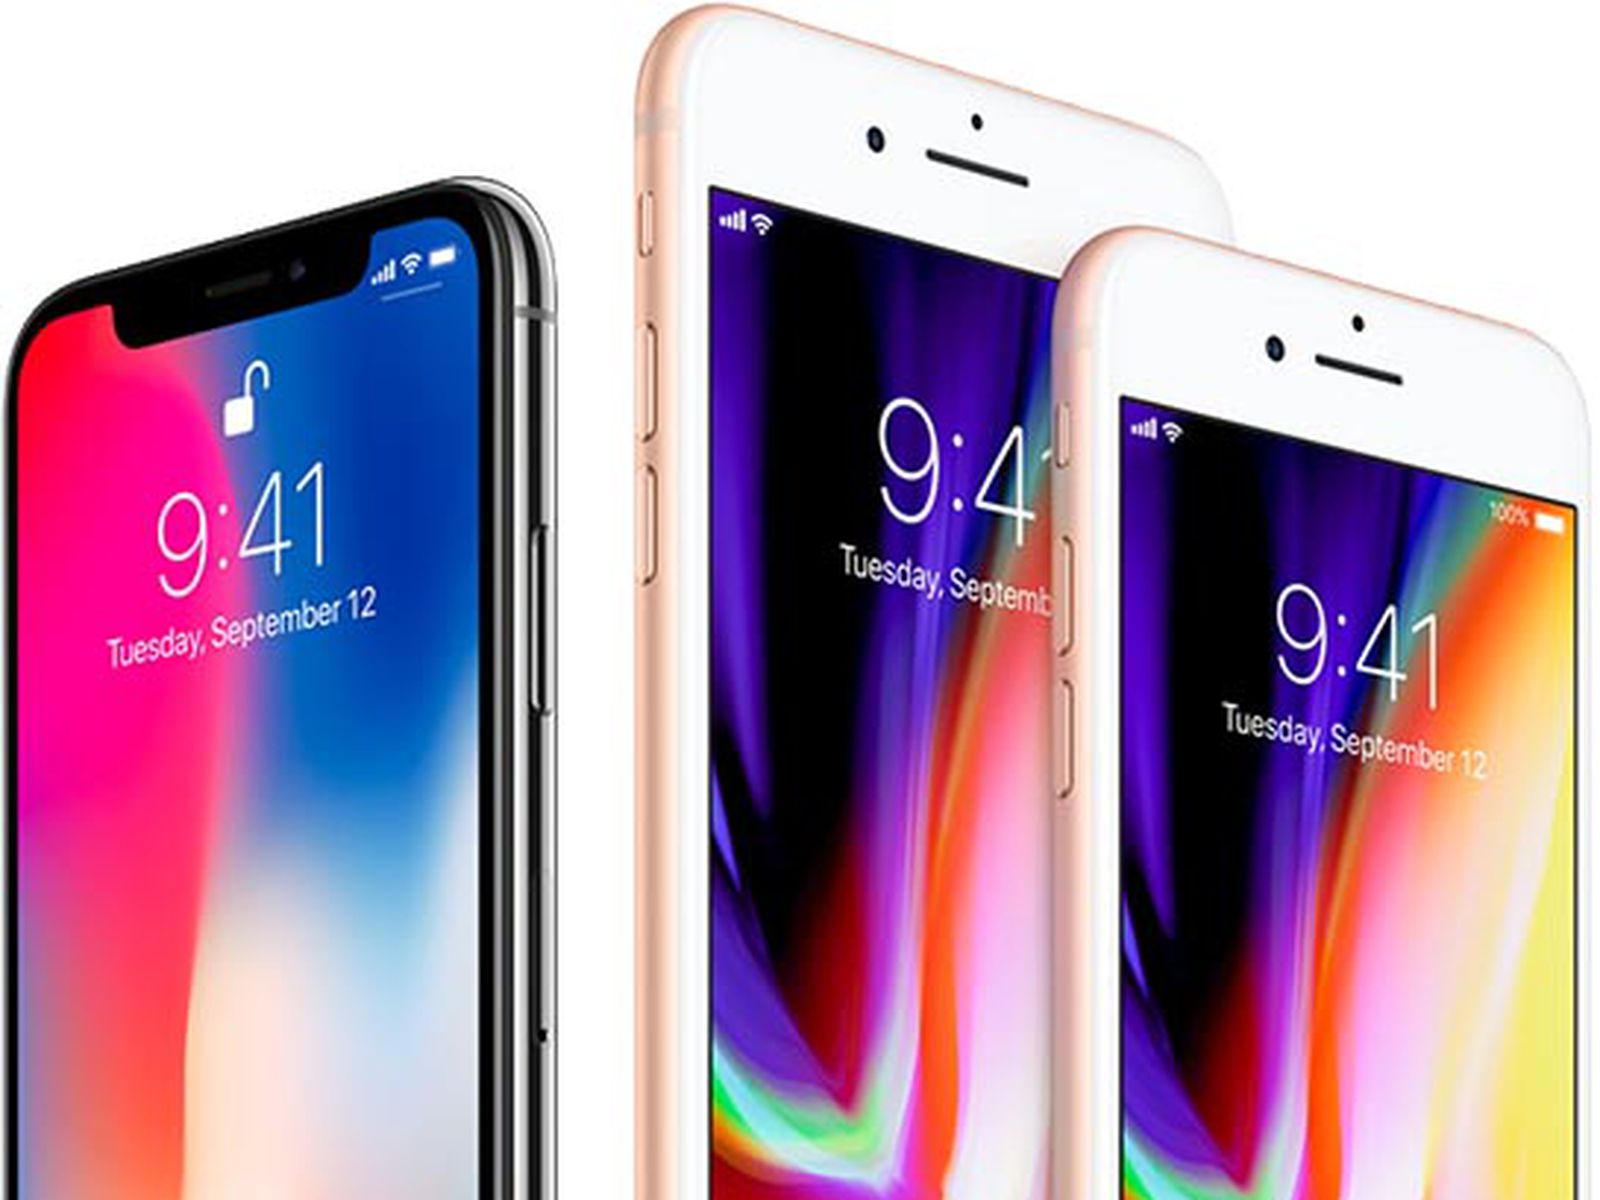 iPhone X pricing, features vs. iPhone 8 and 8 Plus